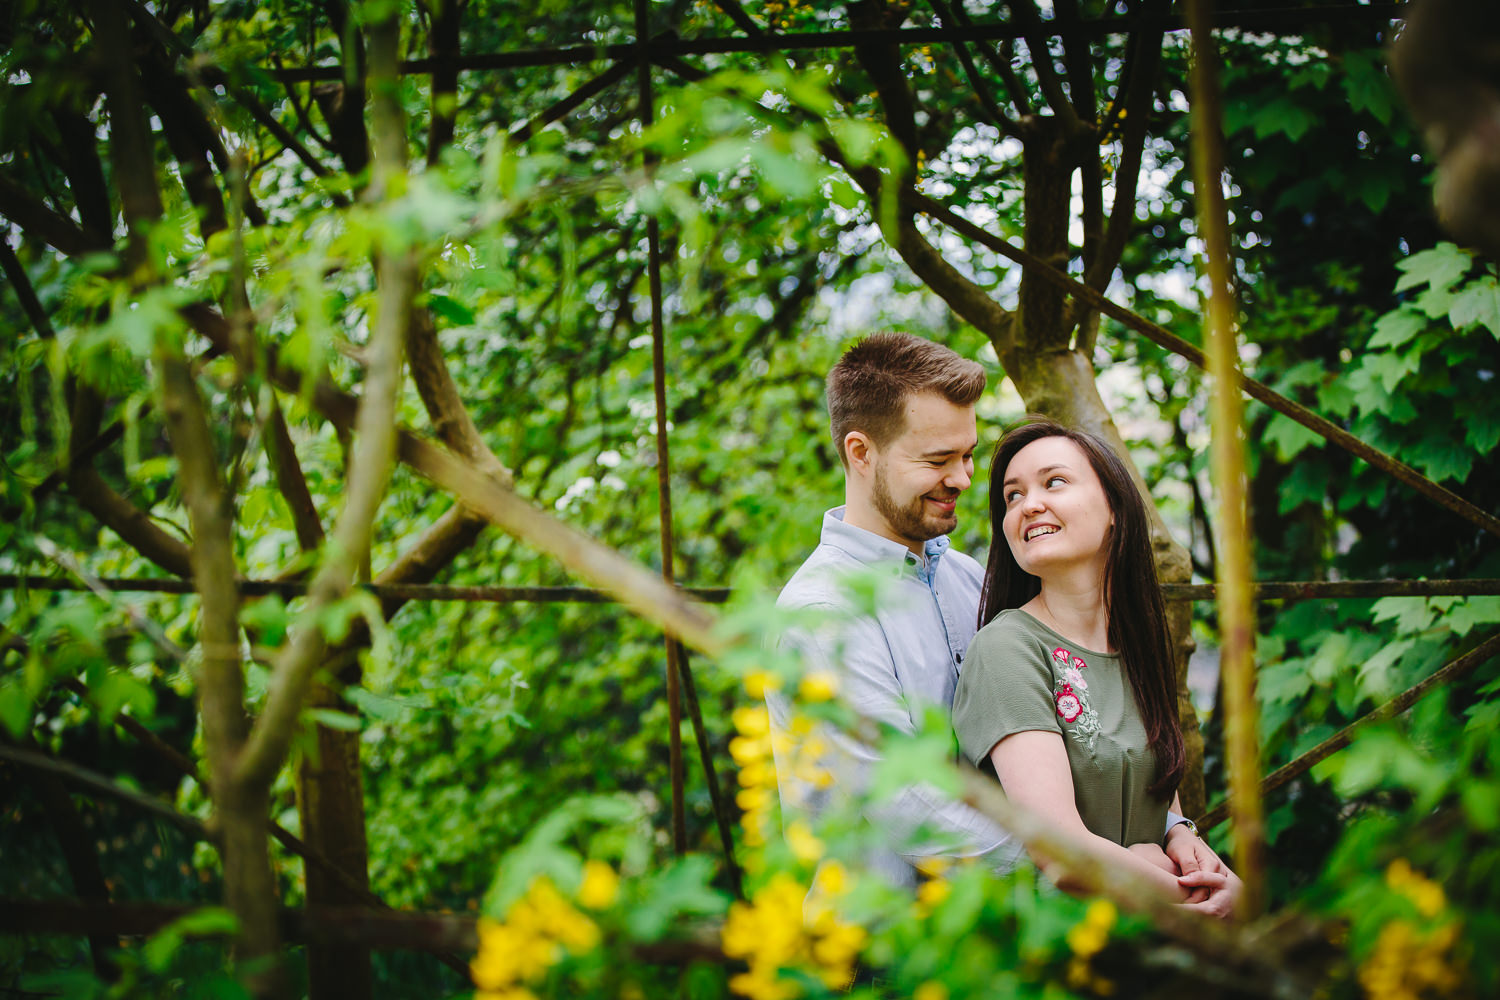 Richmond engagement shoot photo of a couple smiling at one another, under an archway covered in foliage and yellow flowers